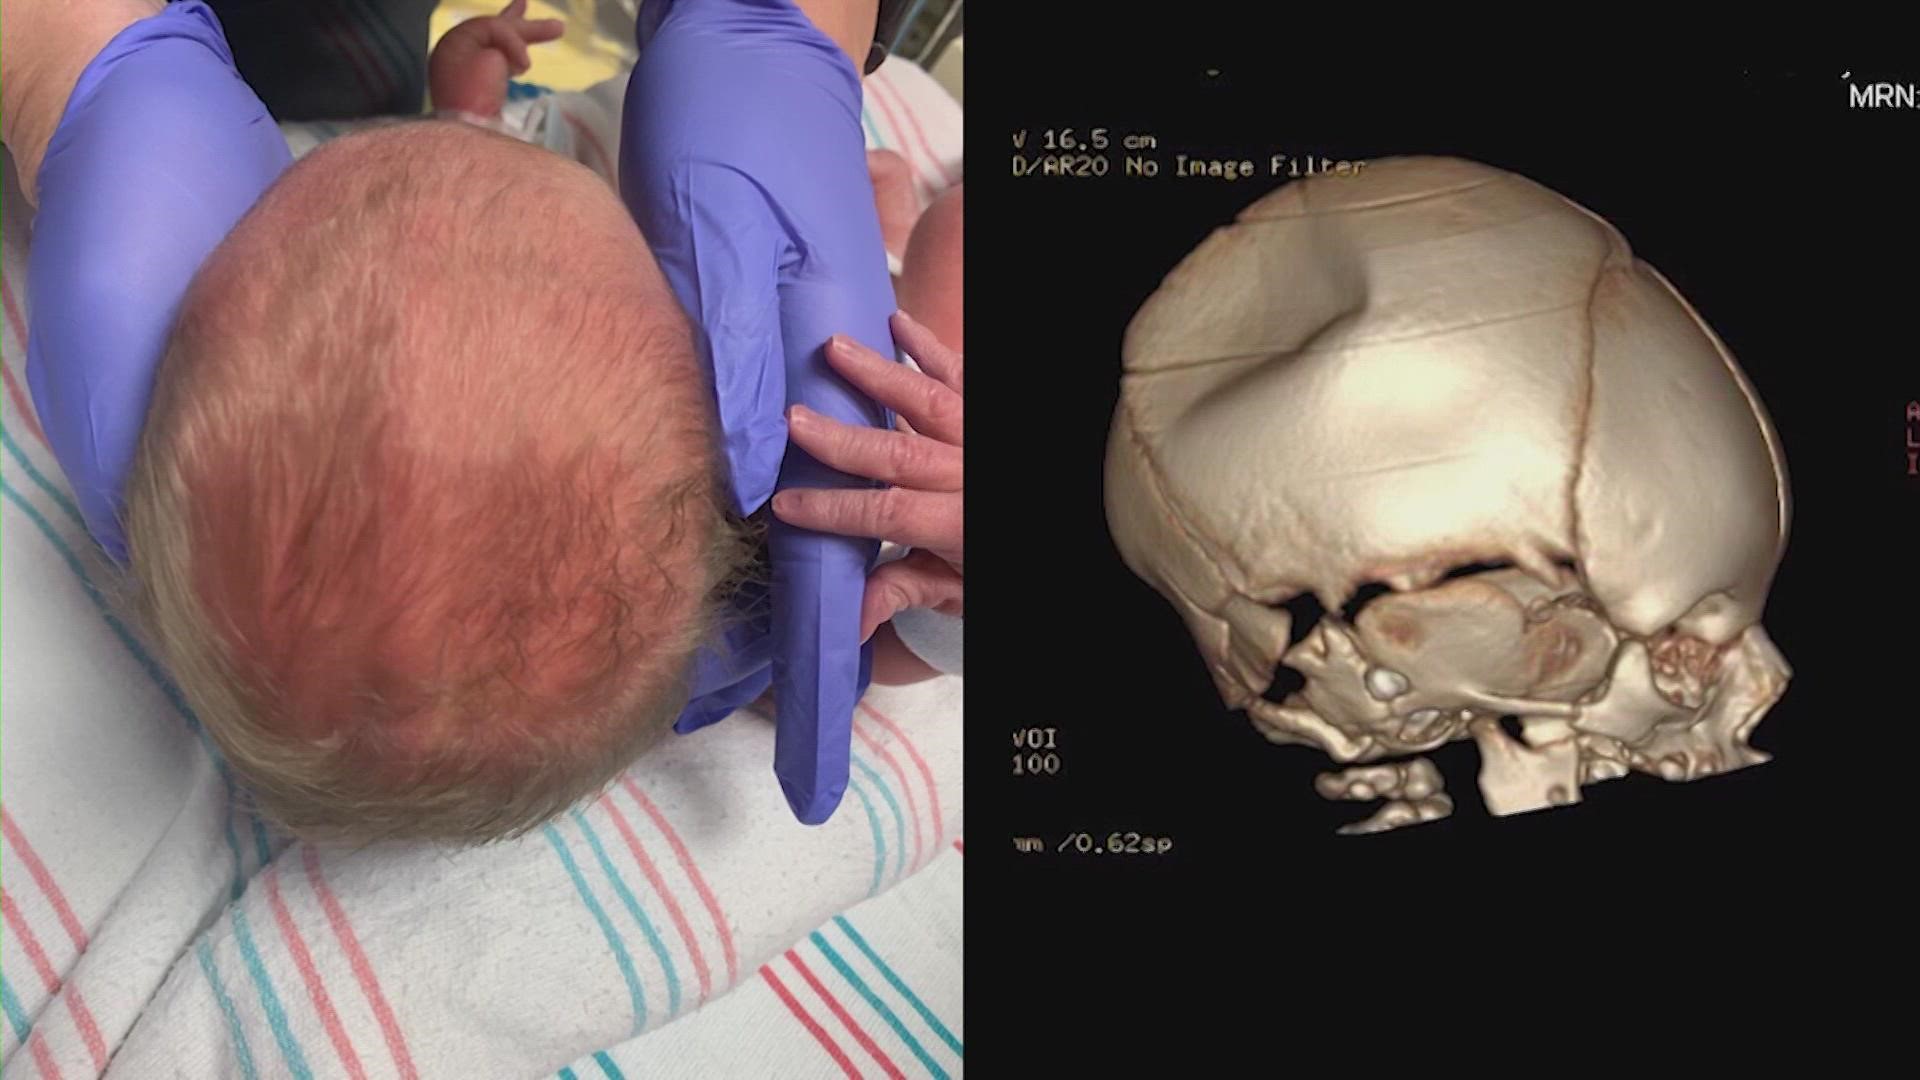 Doctors say it is very rare for babies to be born with a depressed skull fracture. It is typically treated with brain surgery.